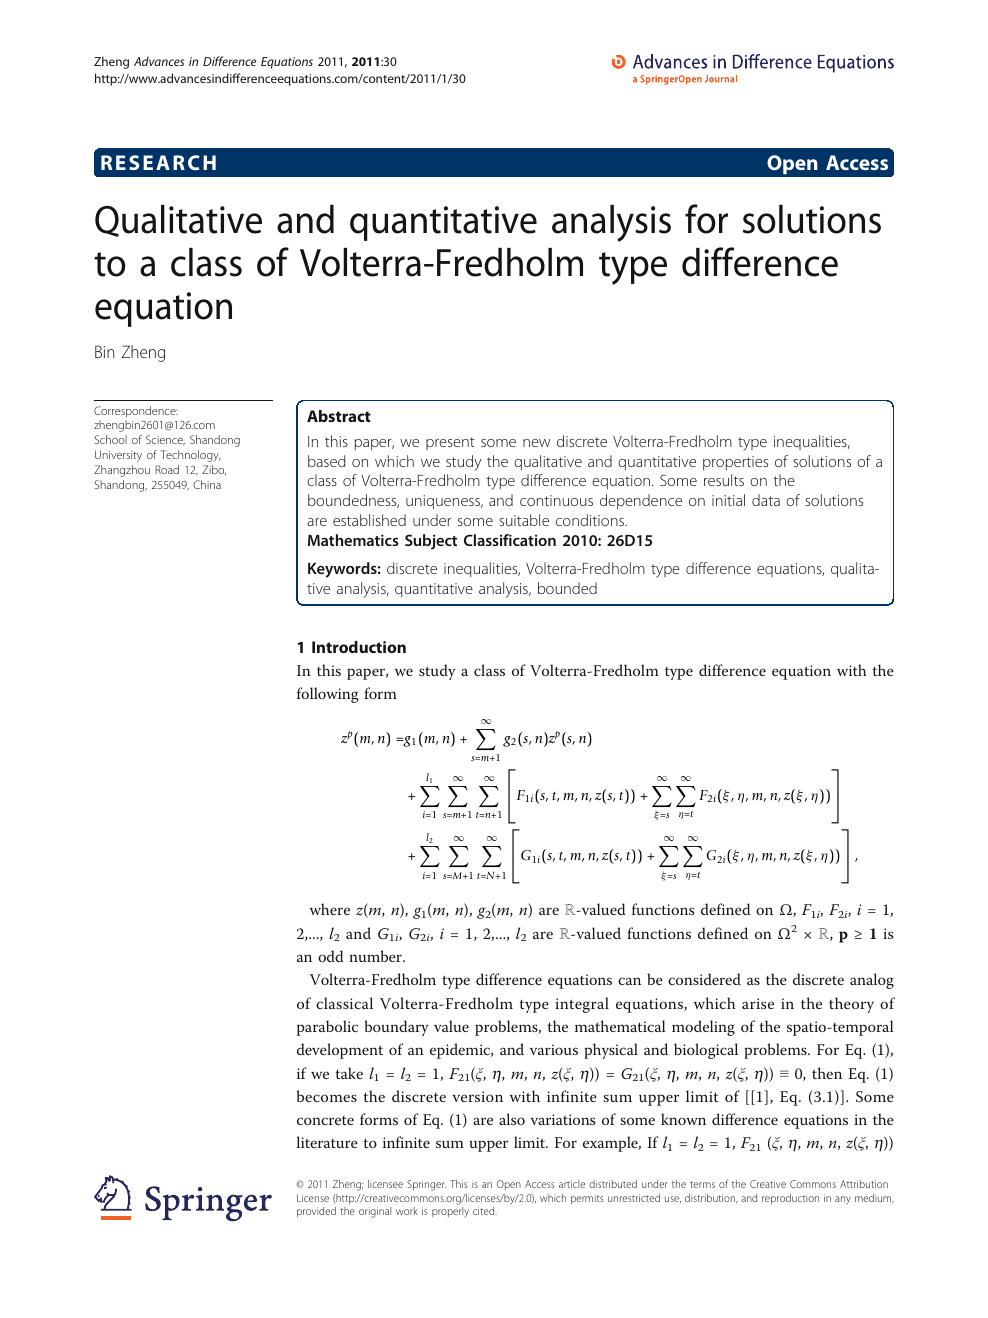 Qualitative And Quantitative Analysis For Solutions To A Class Of Volterra Fredholm Type Difference Equation Topic Of Research Paper In Mathematics Download Scholarly Article Pdf And Read For Free On Cyberleninka Open